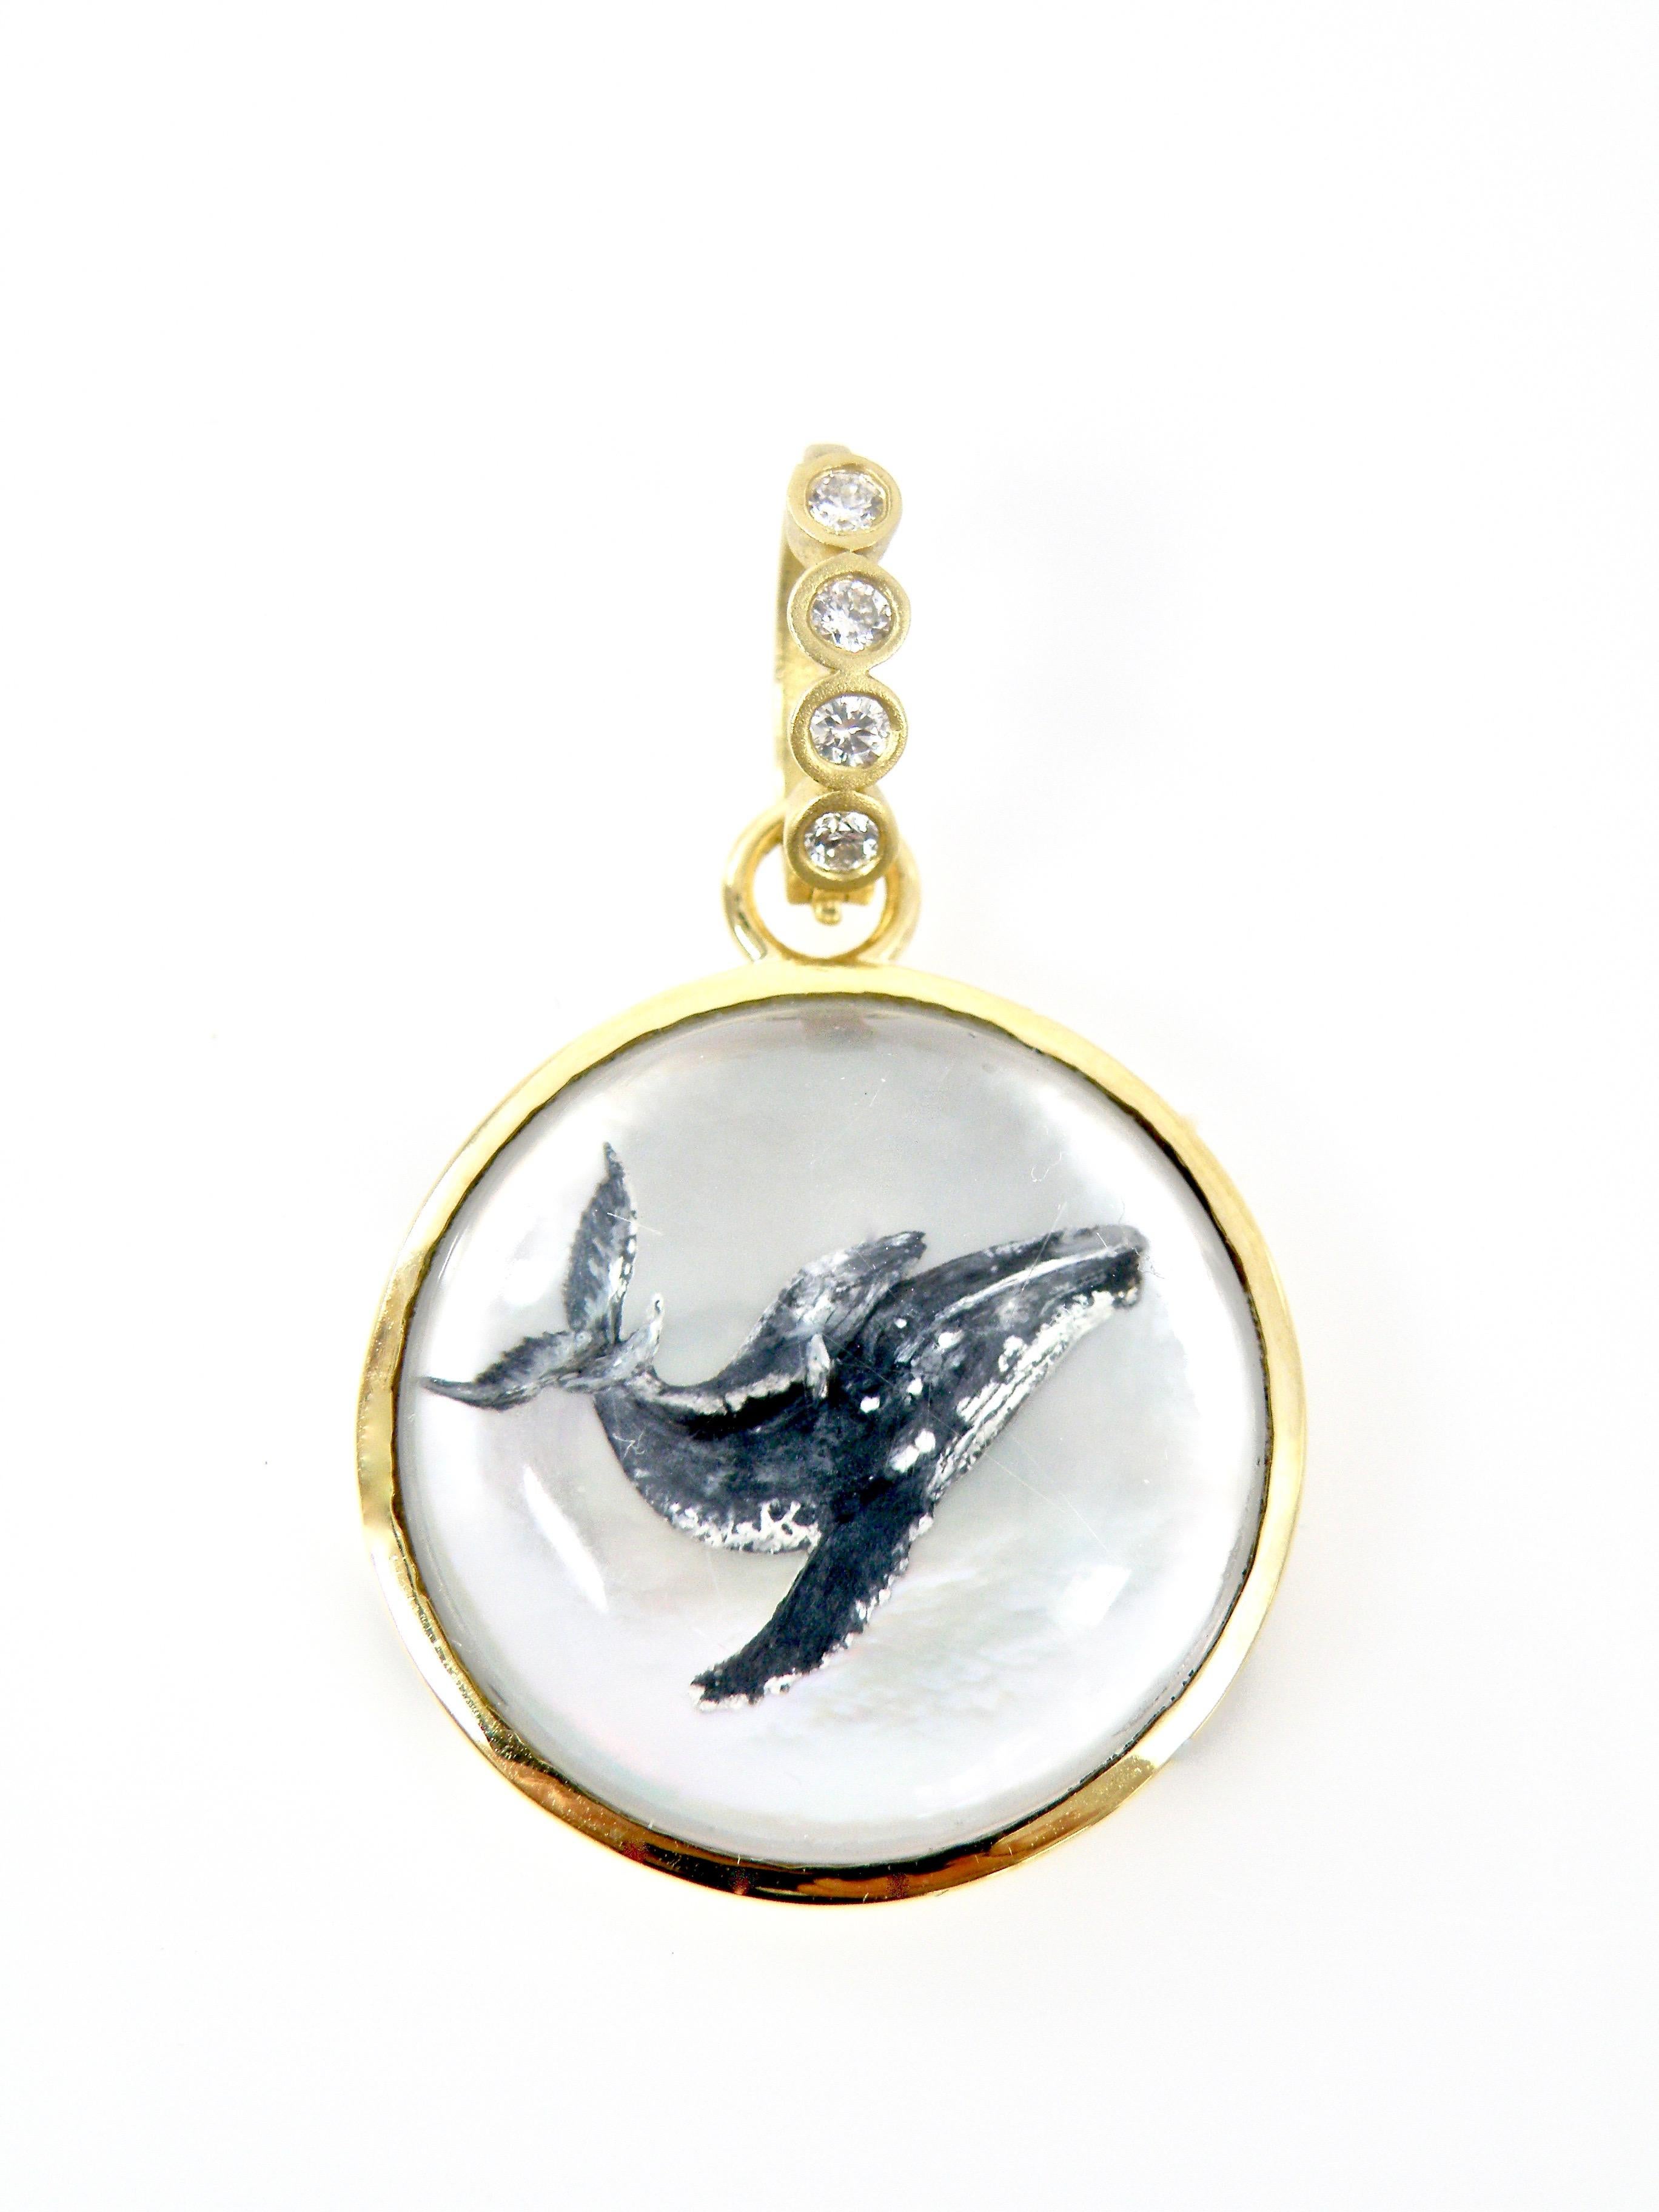 Modern 18 Karat Sapphire Reverse Crystal Carving of a Whale Family Pendant in 18 Karat For Sale